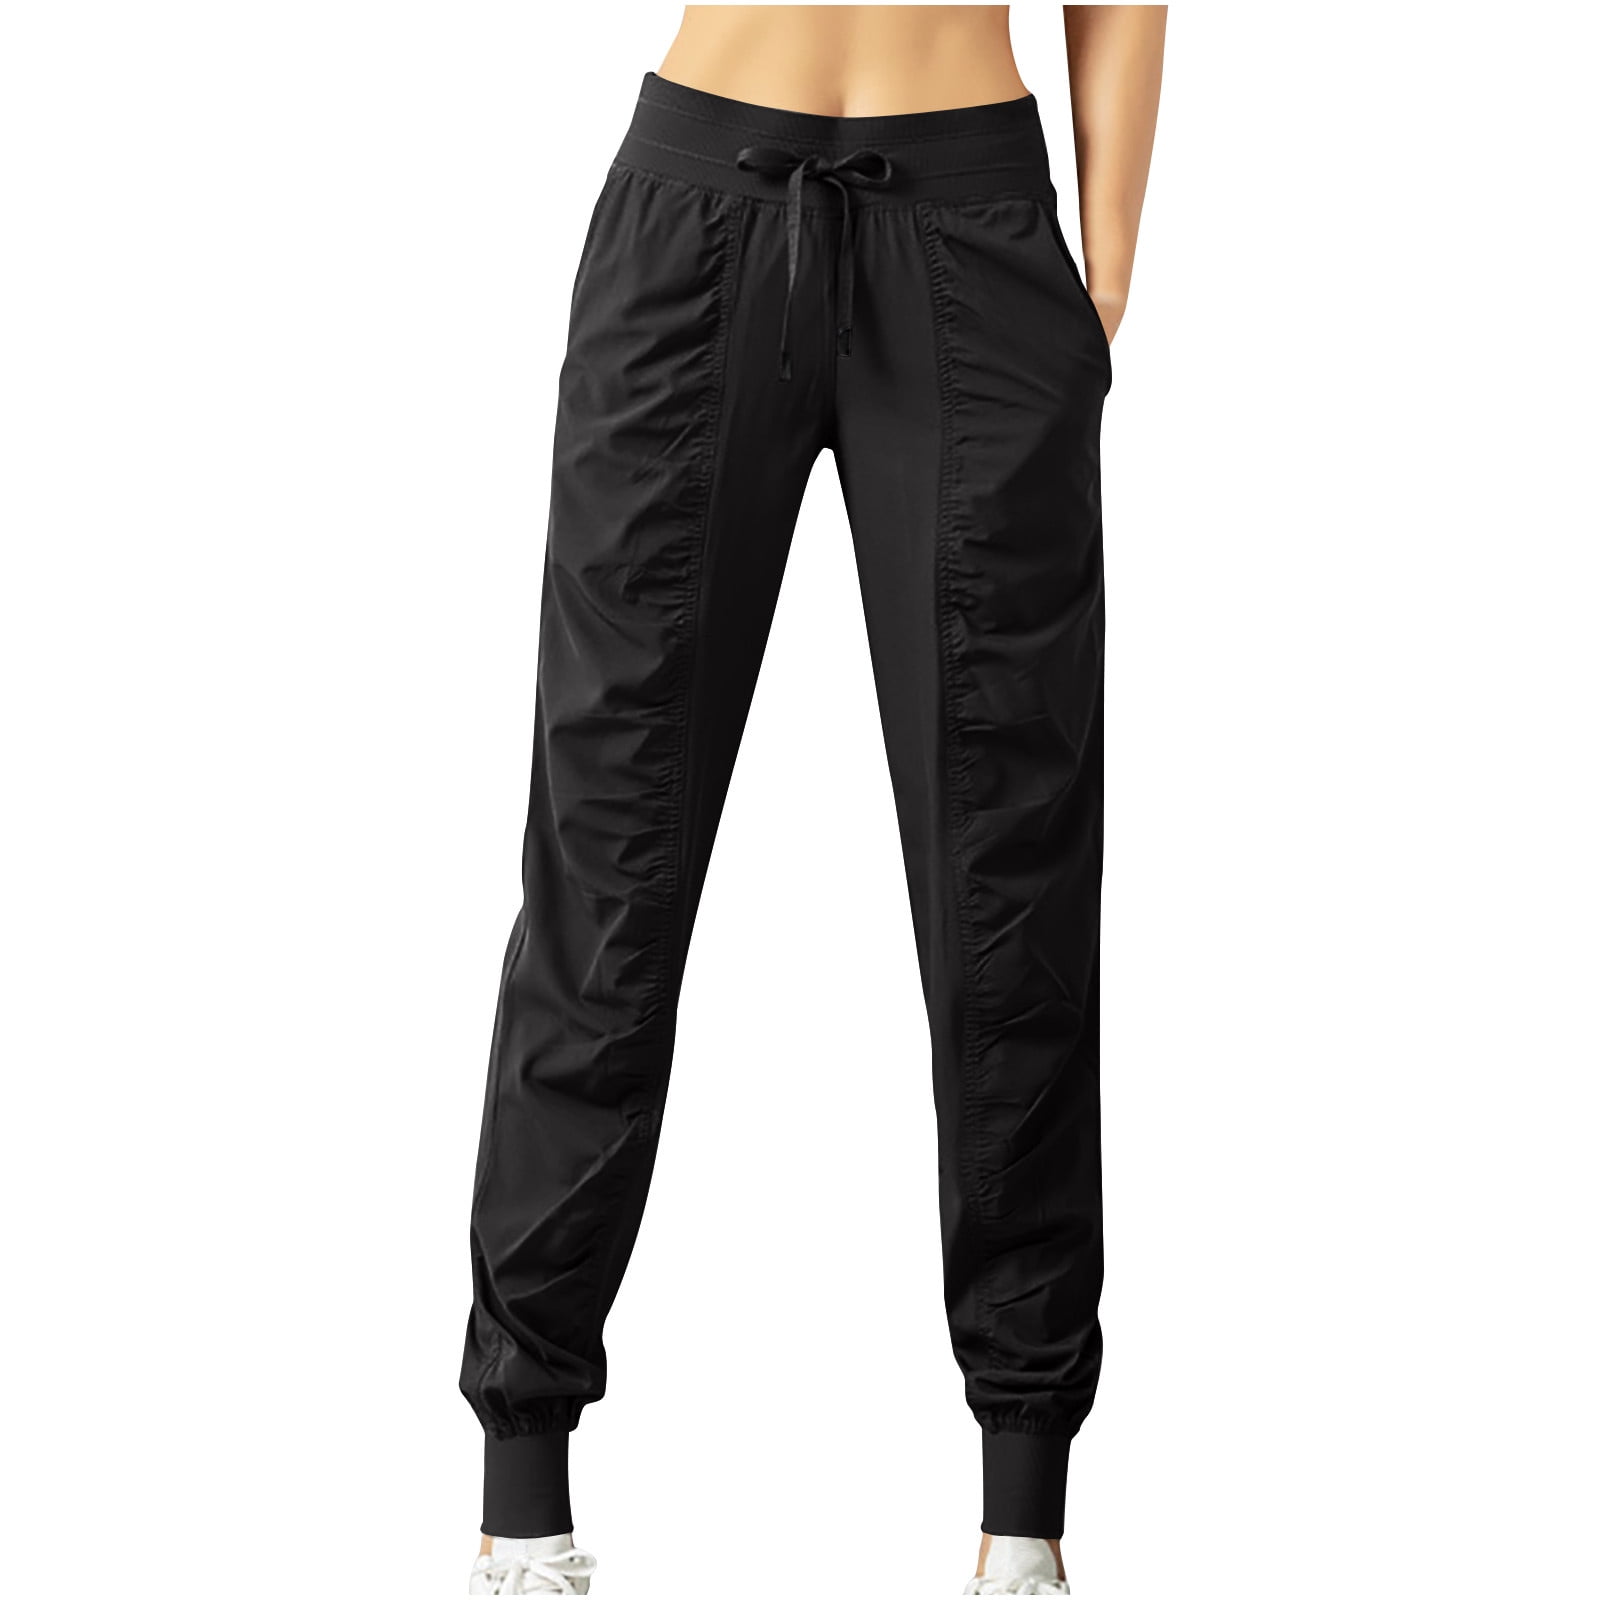 JWZUY Women's Joggers Hiking Pants Lightweight Quick Dry Pants with Pockets  High Waist Athletic Pants for Travel Hilking Black M